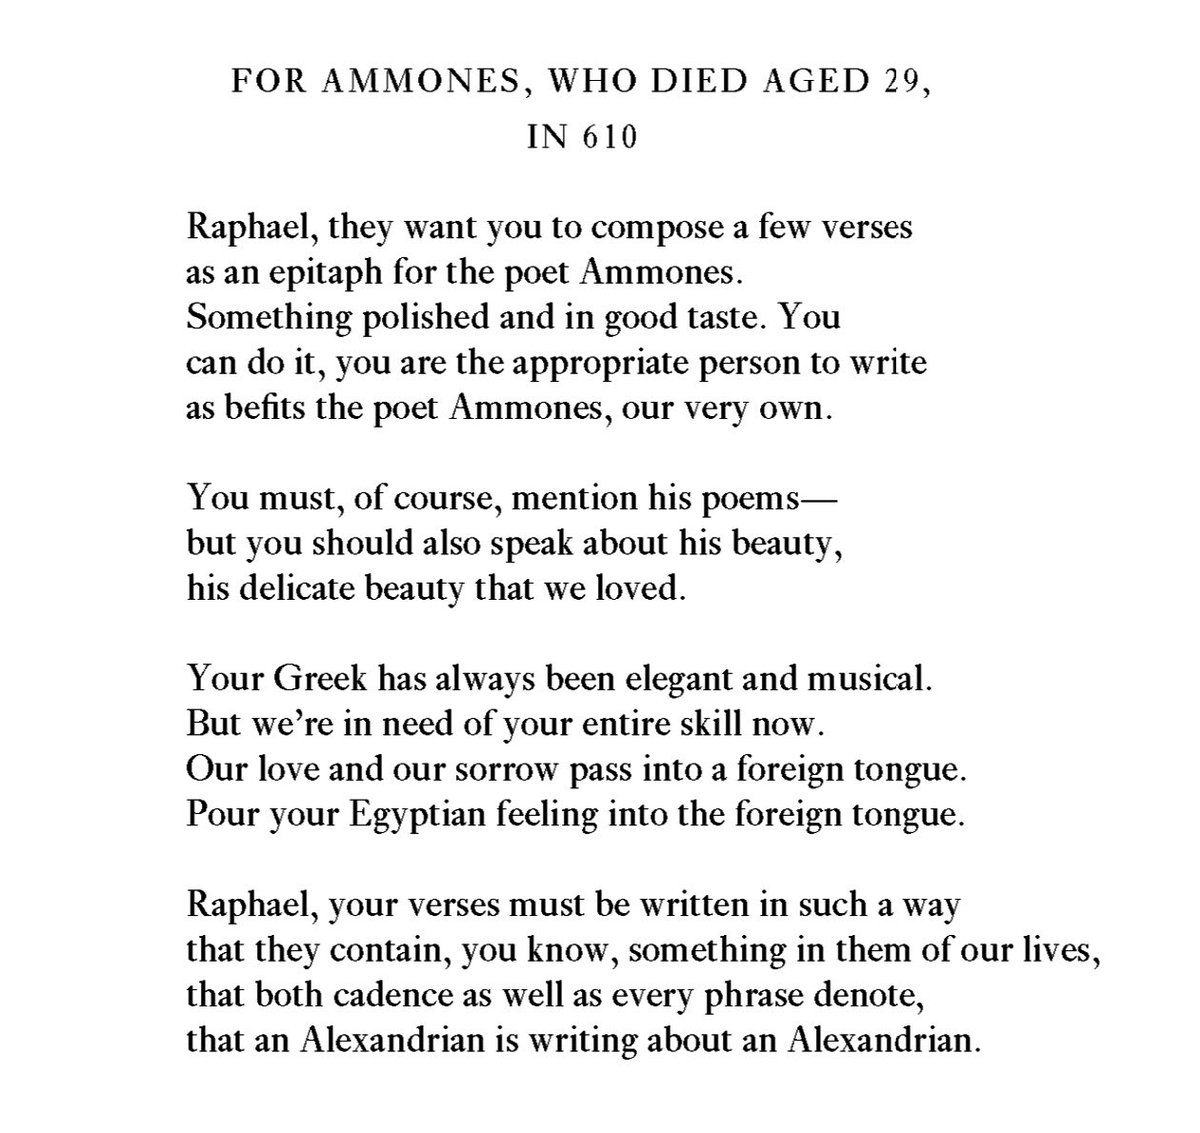 “That an Alexandrian is writing about an Alexandrian.” – C.P. Cavafy, “For Ammones, Who Died Aged 29, in 610”, translated by Evangelos Sachperoglou. #poetry #cavafy